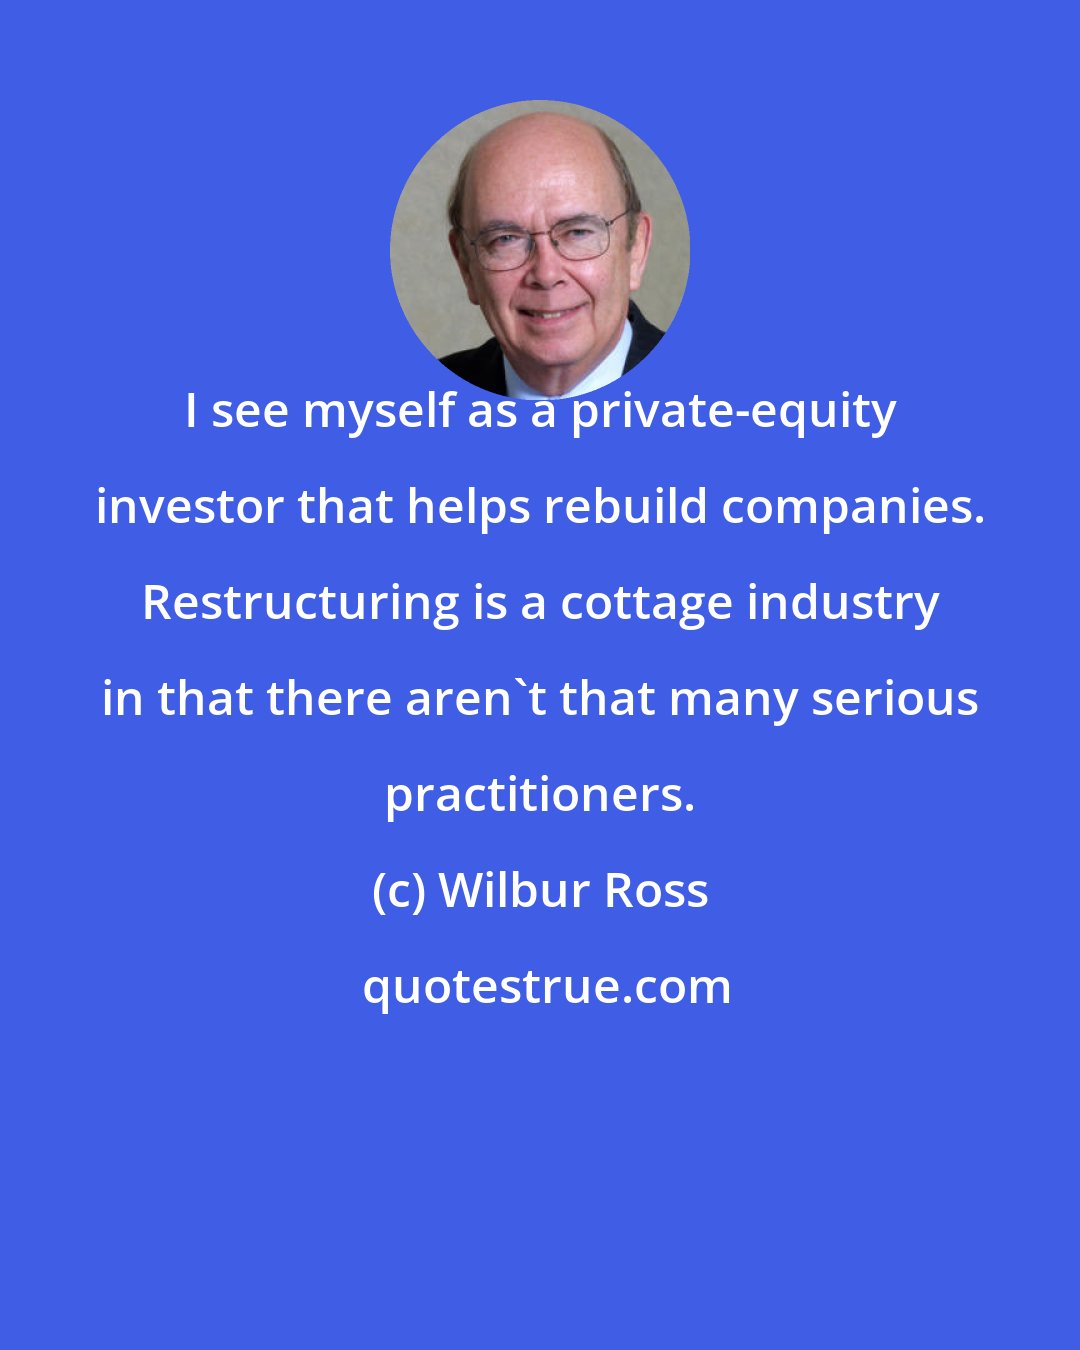 Wilbur Ross: I see myself as a private-equity investor that helps rebuild companies. Restructuring is a cottage industry in that there aren't that many serious practitioners.